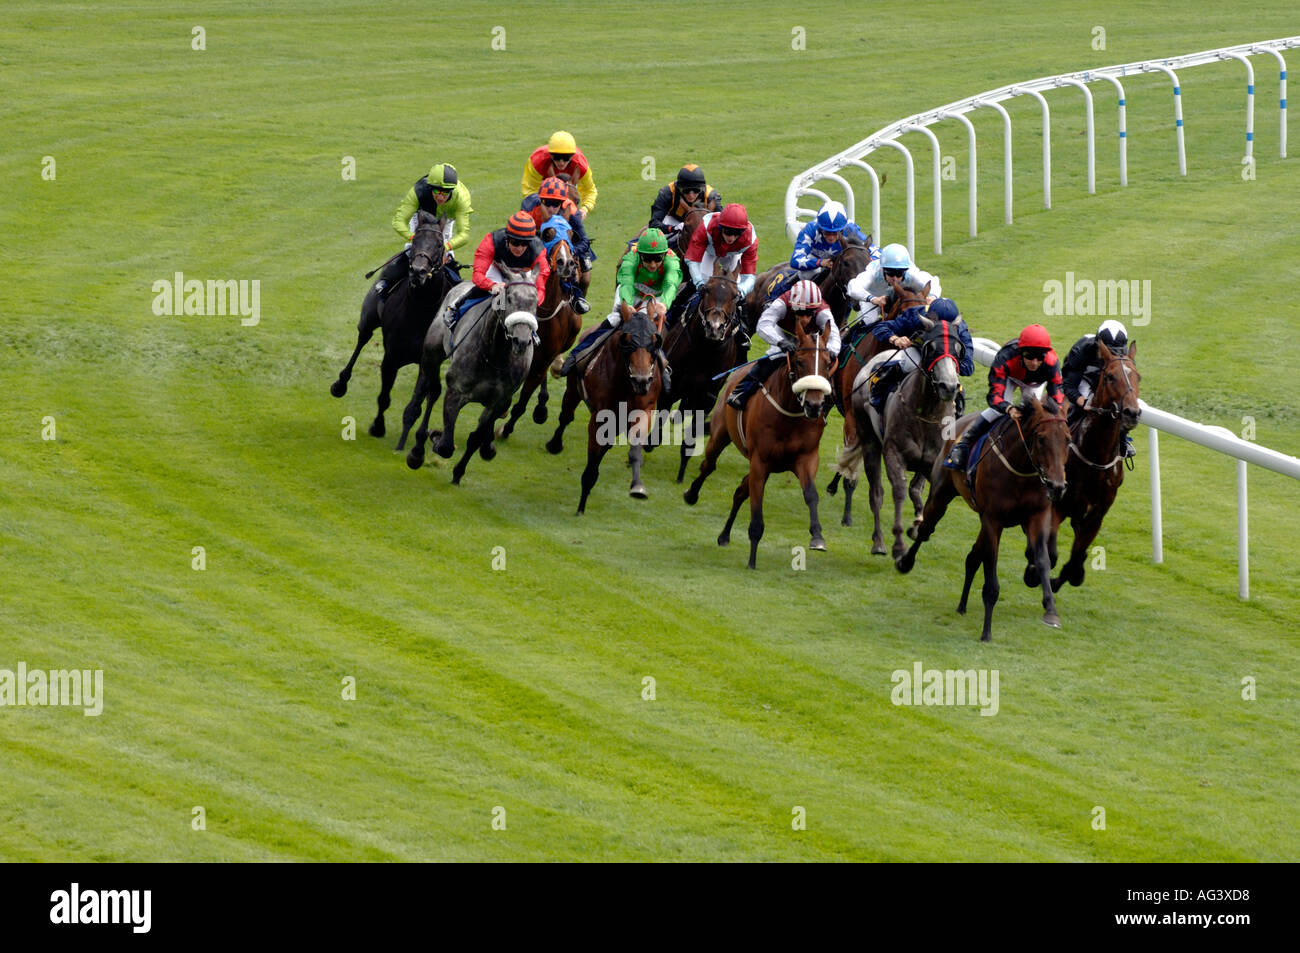 Racehorses at Chester Race meeting England UK July 2005 Stock Photo